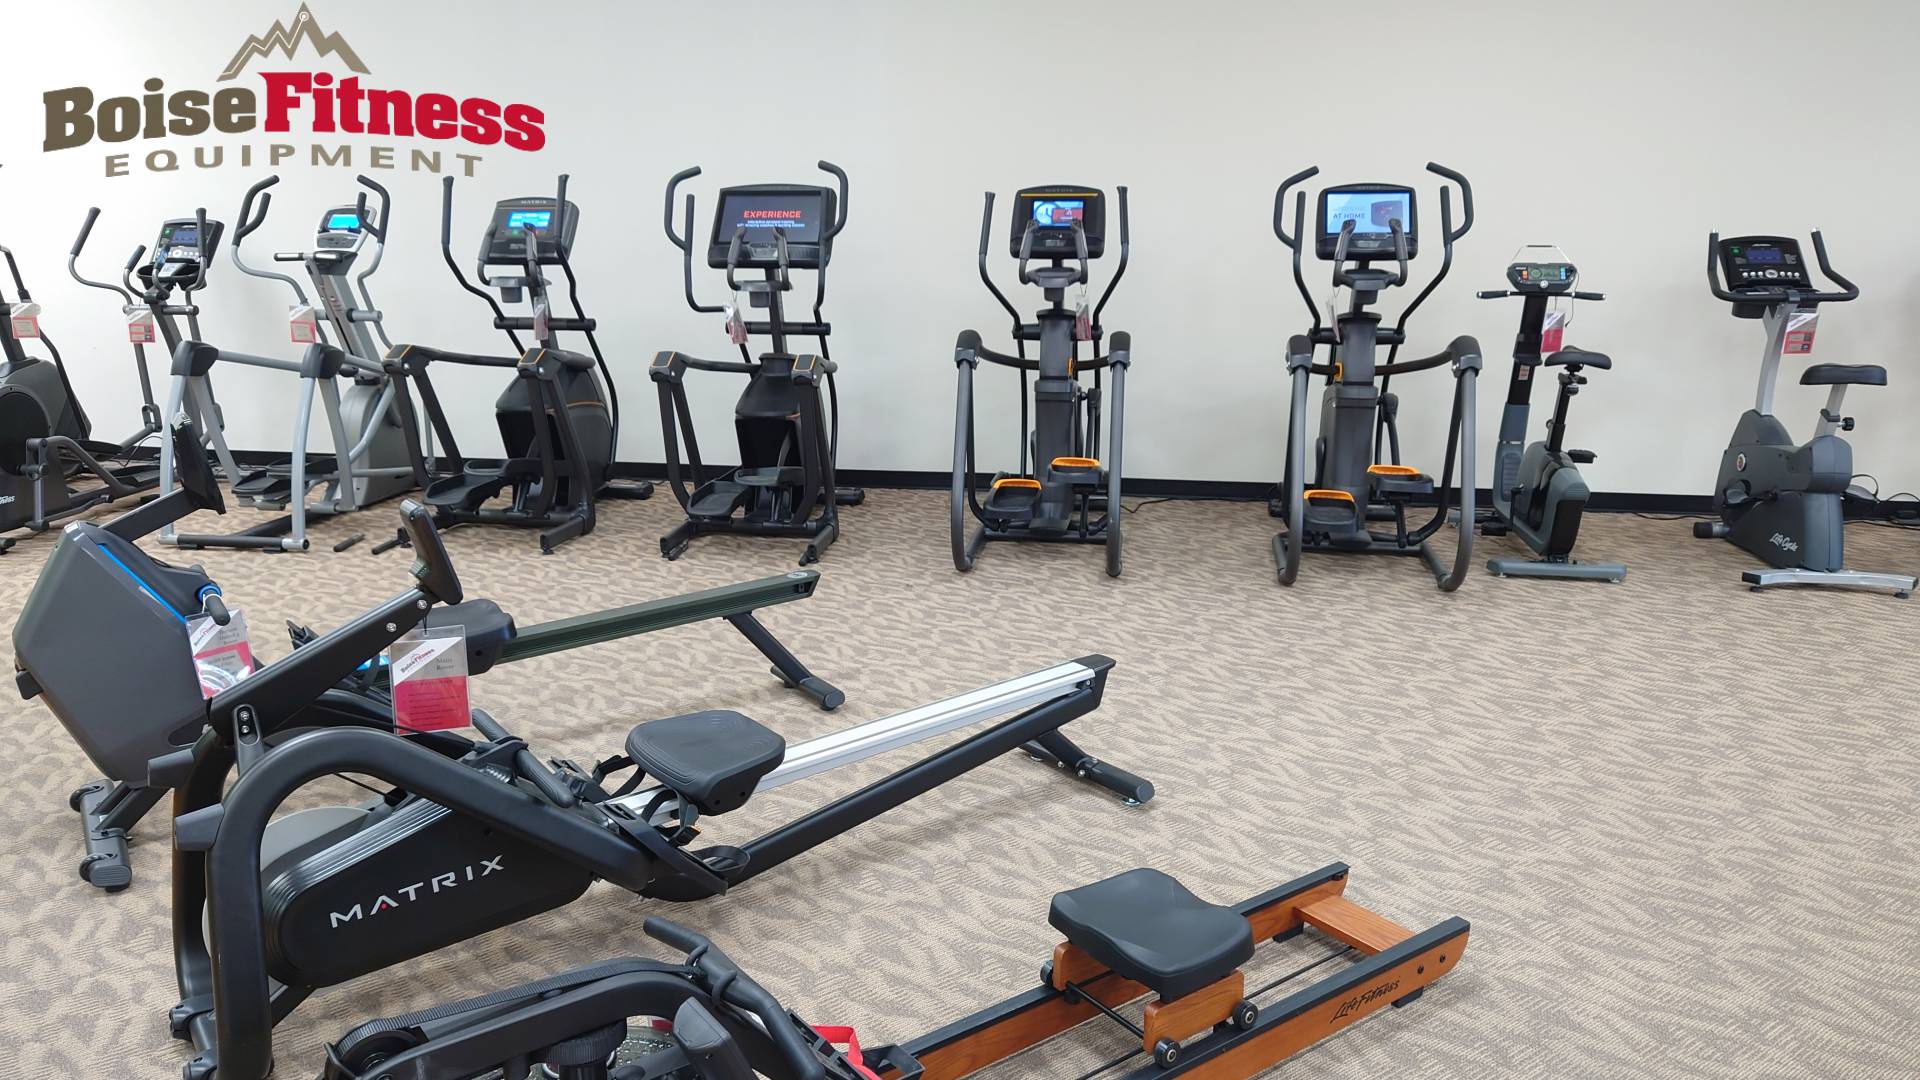 Idaho's Source for your Fitness Equipment Needs!